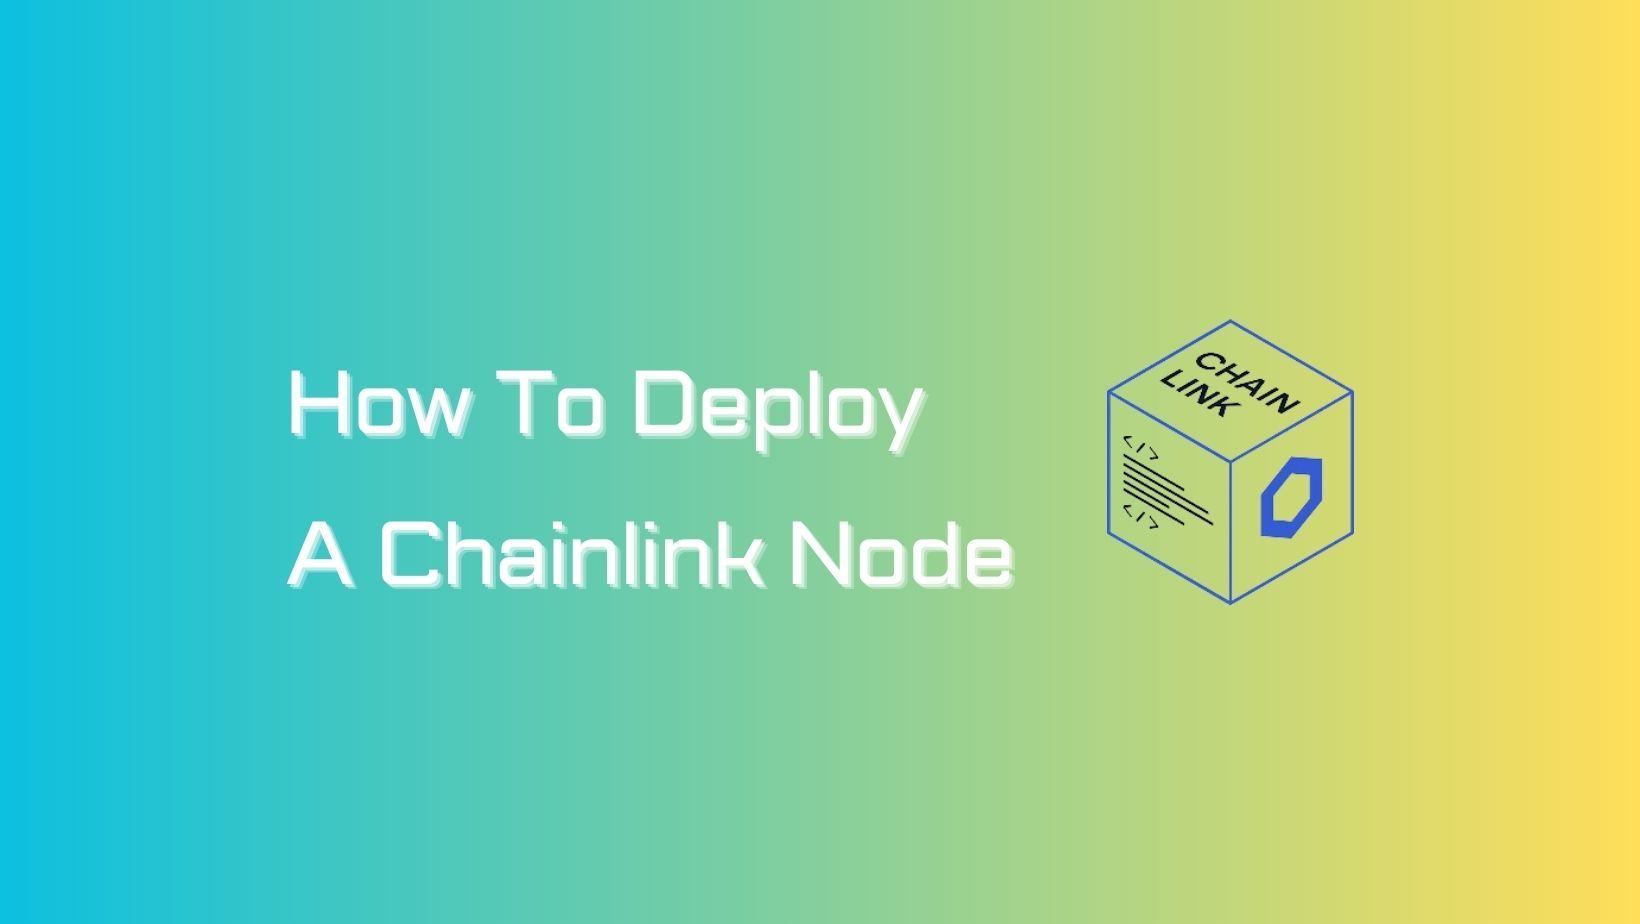 How To Deploy A Chainlink Node with Docker